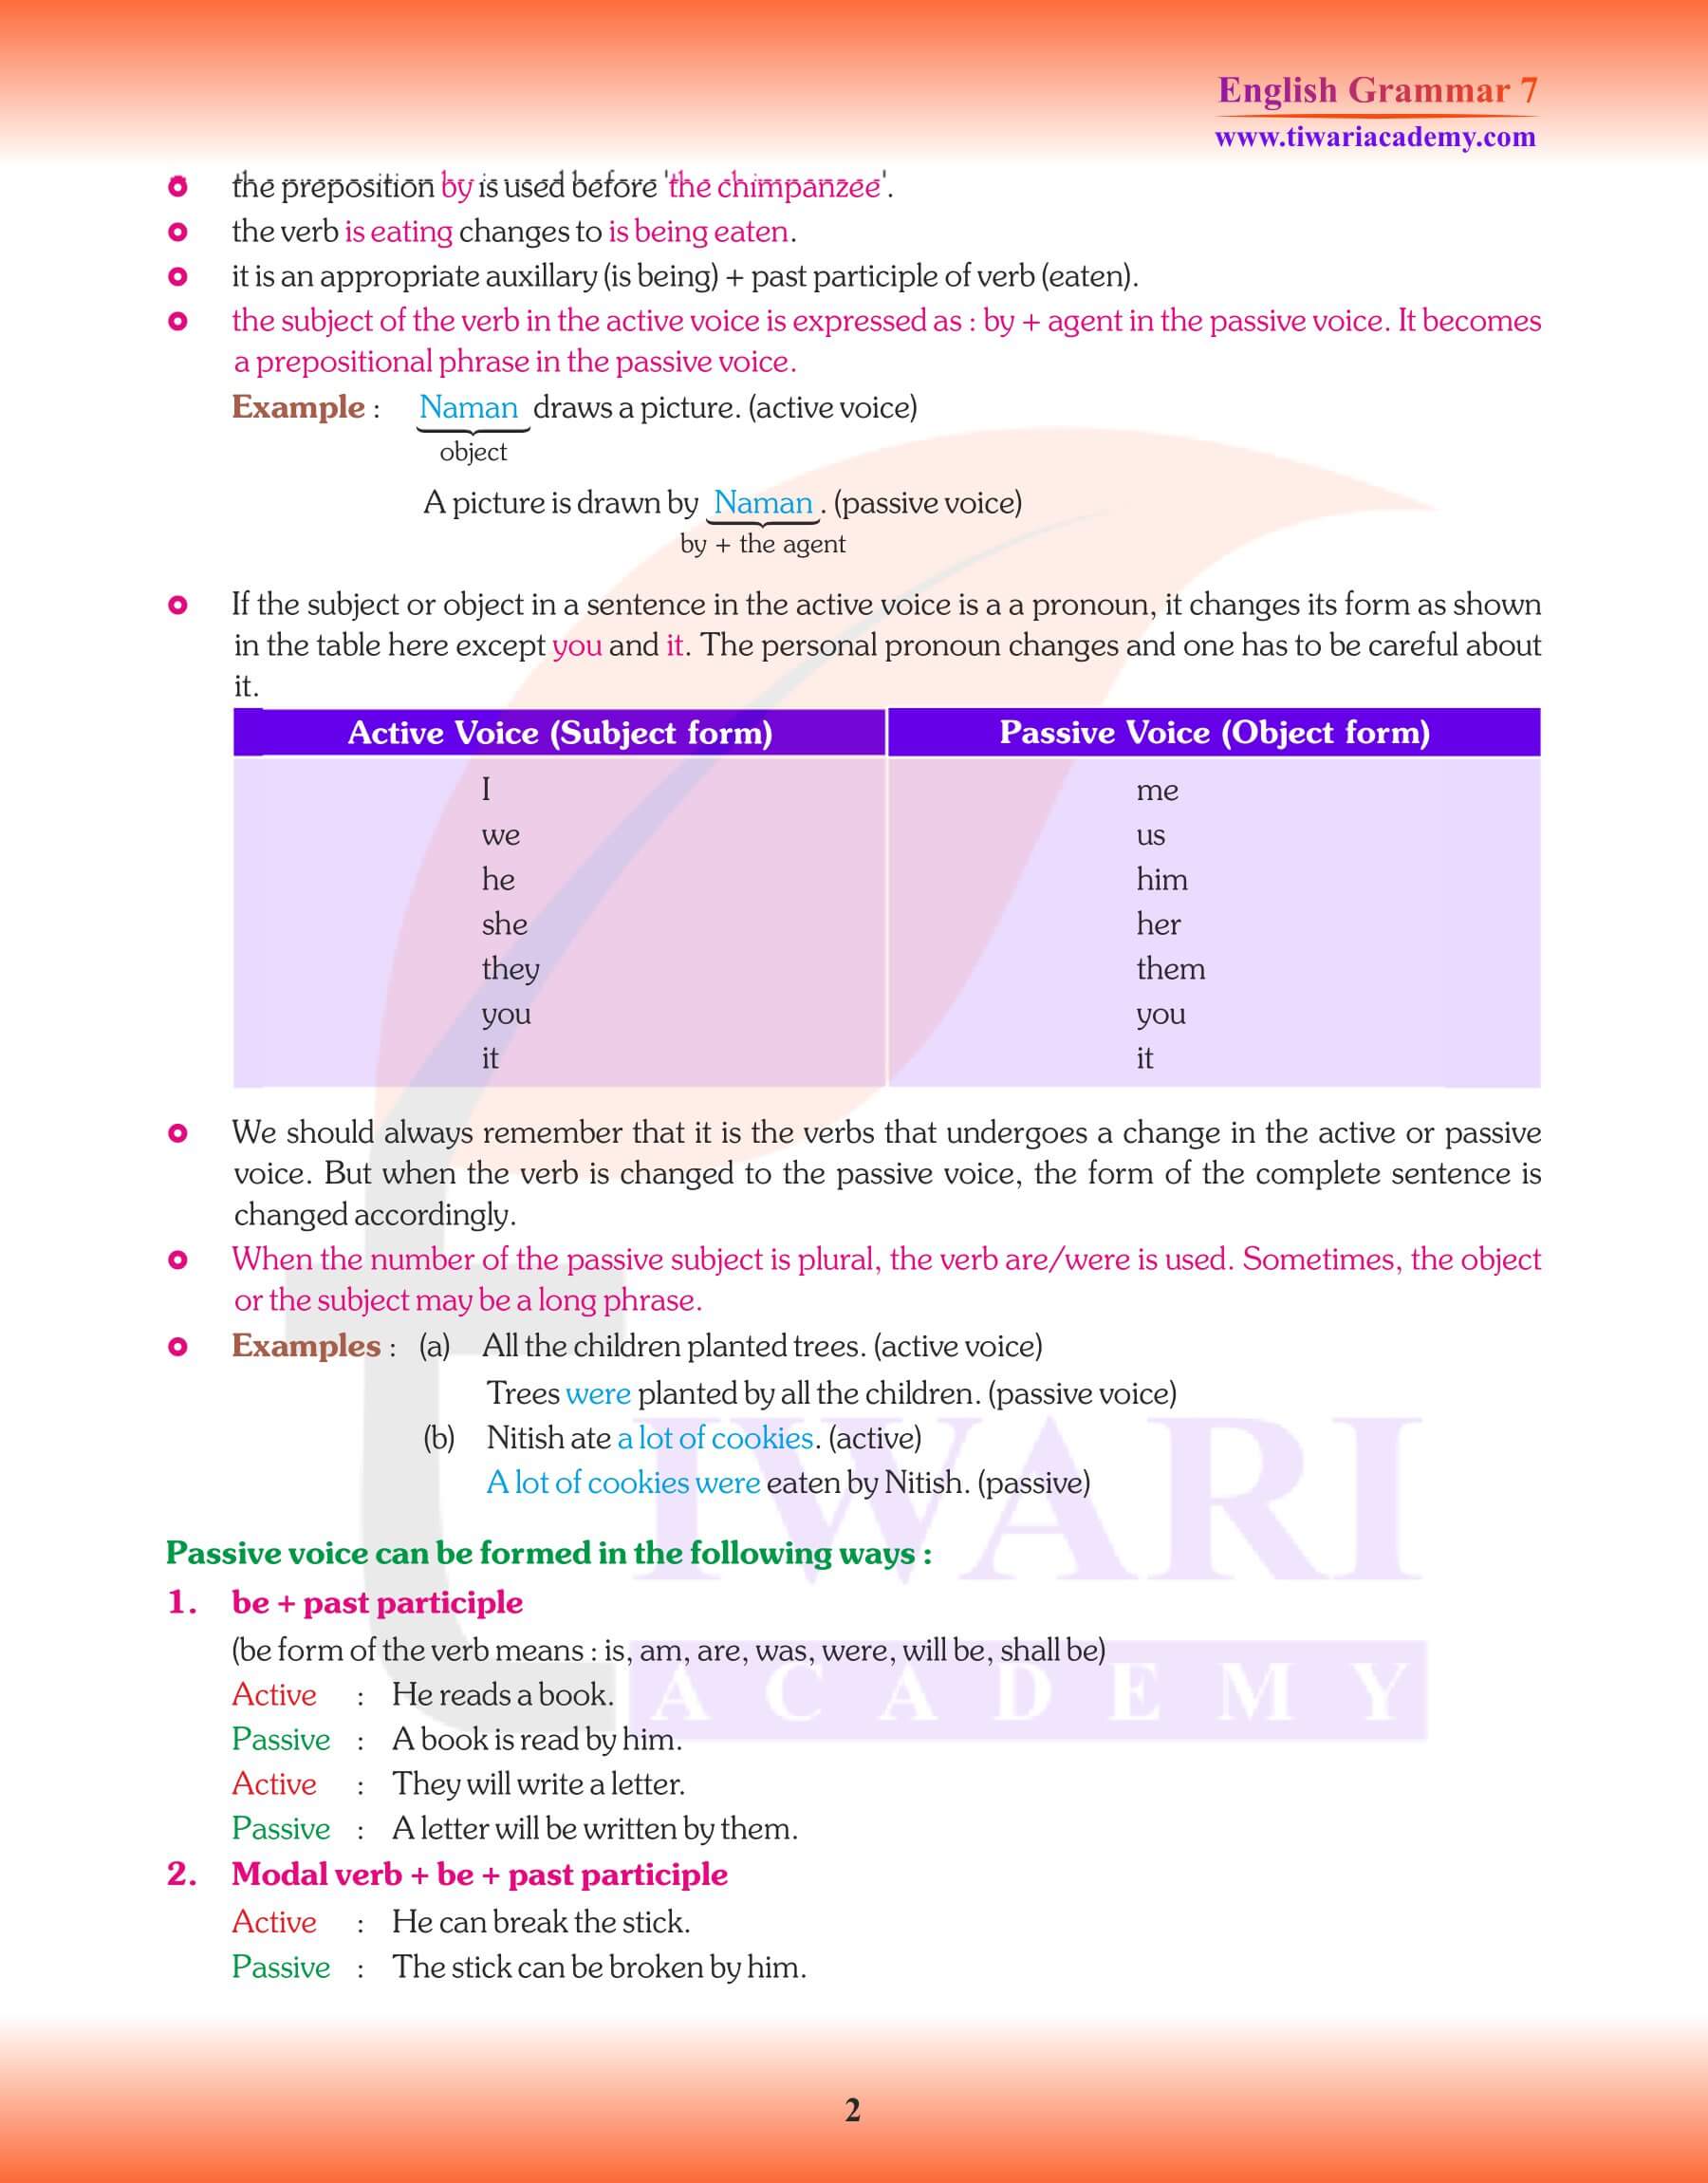 Class 7 English Grammar Chapter 16 Revision Notes